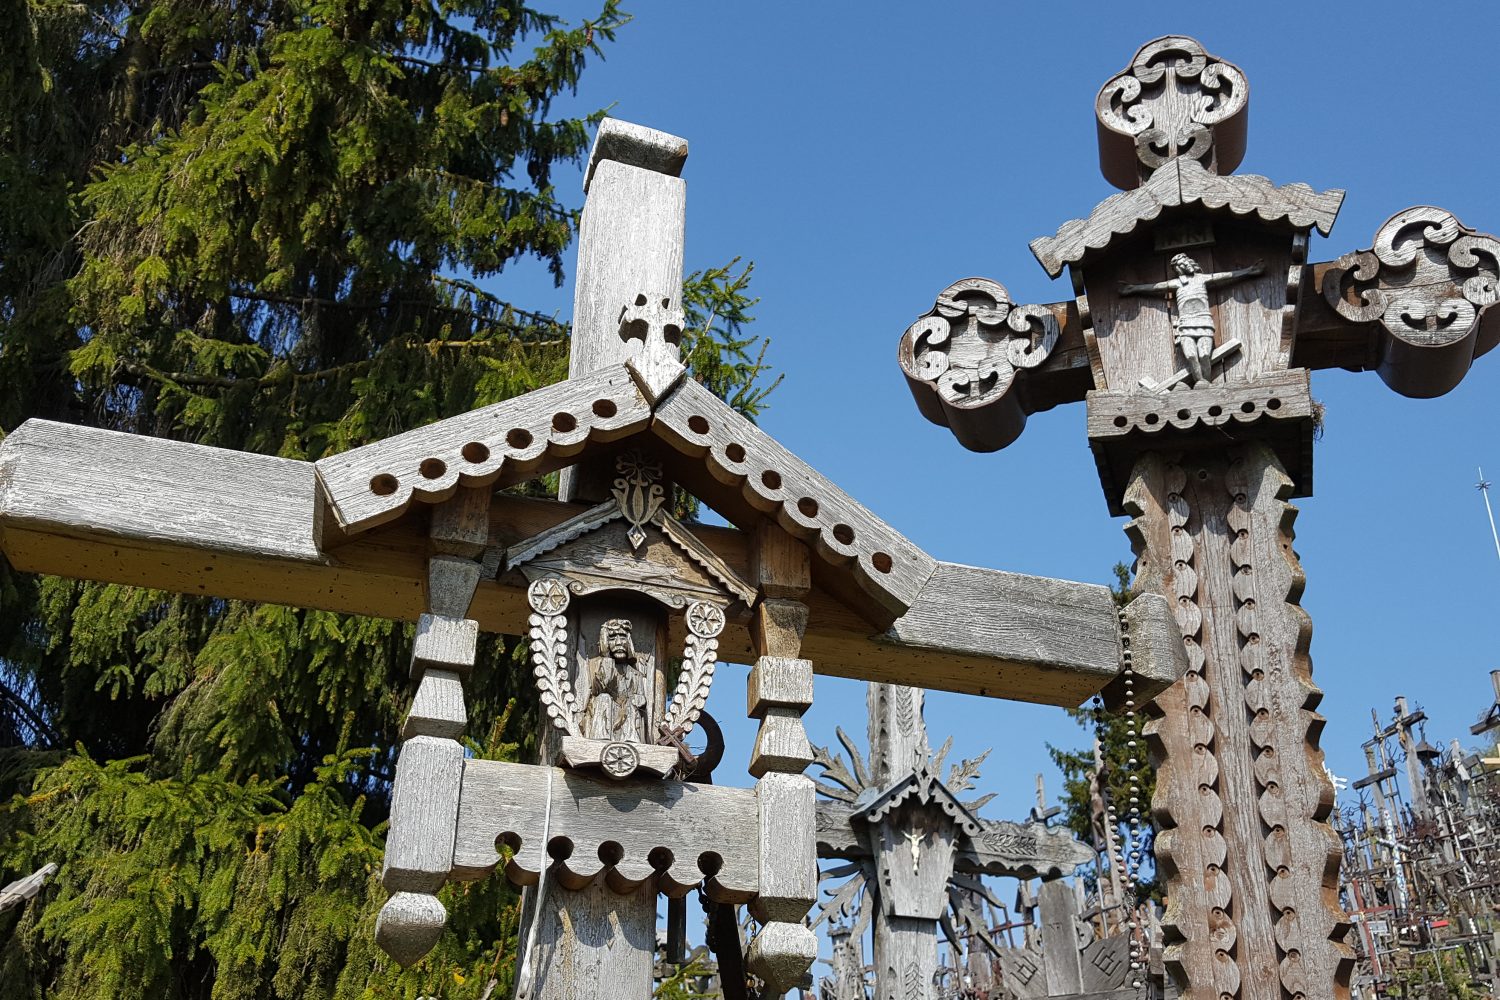 cross crafting tradition in lithuania crosses